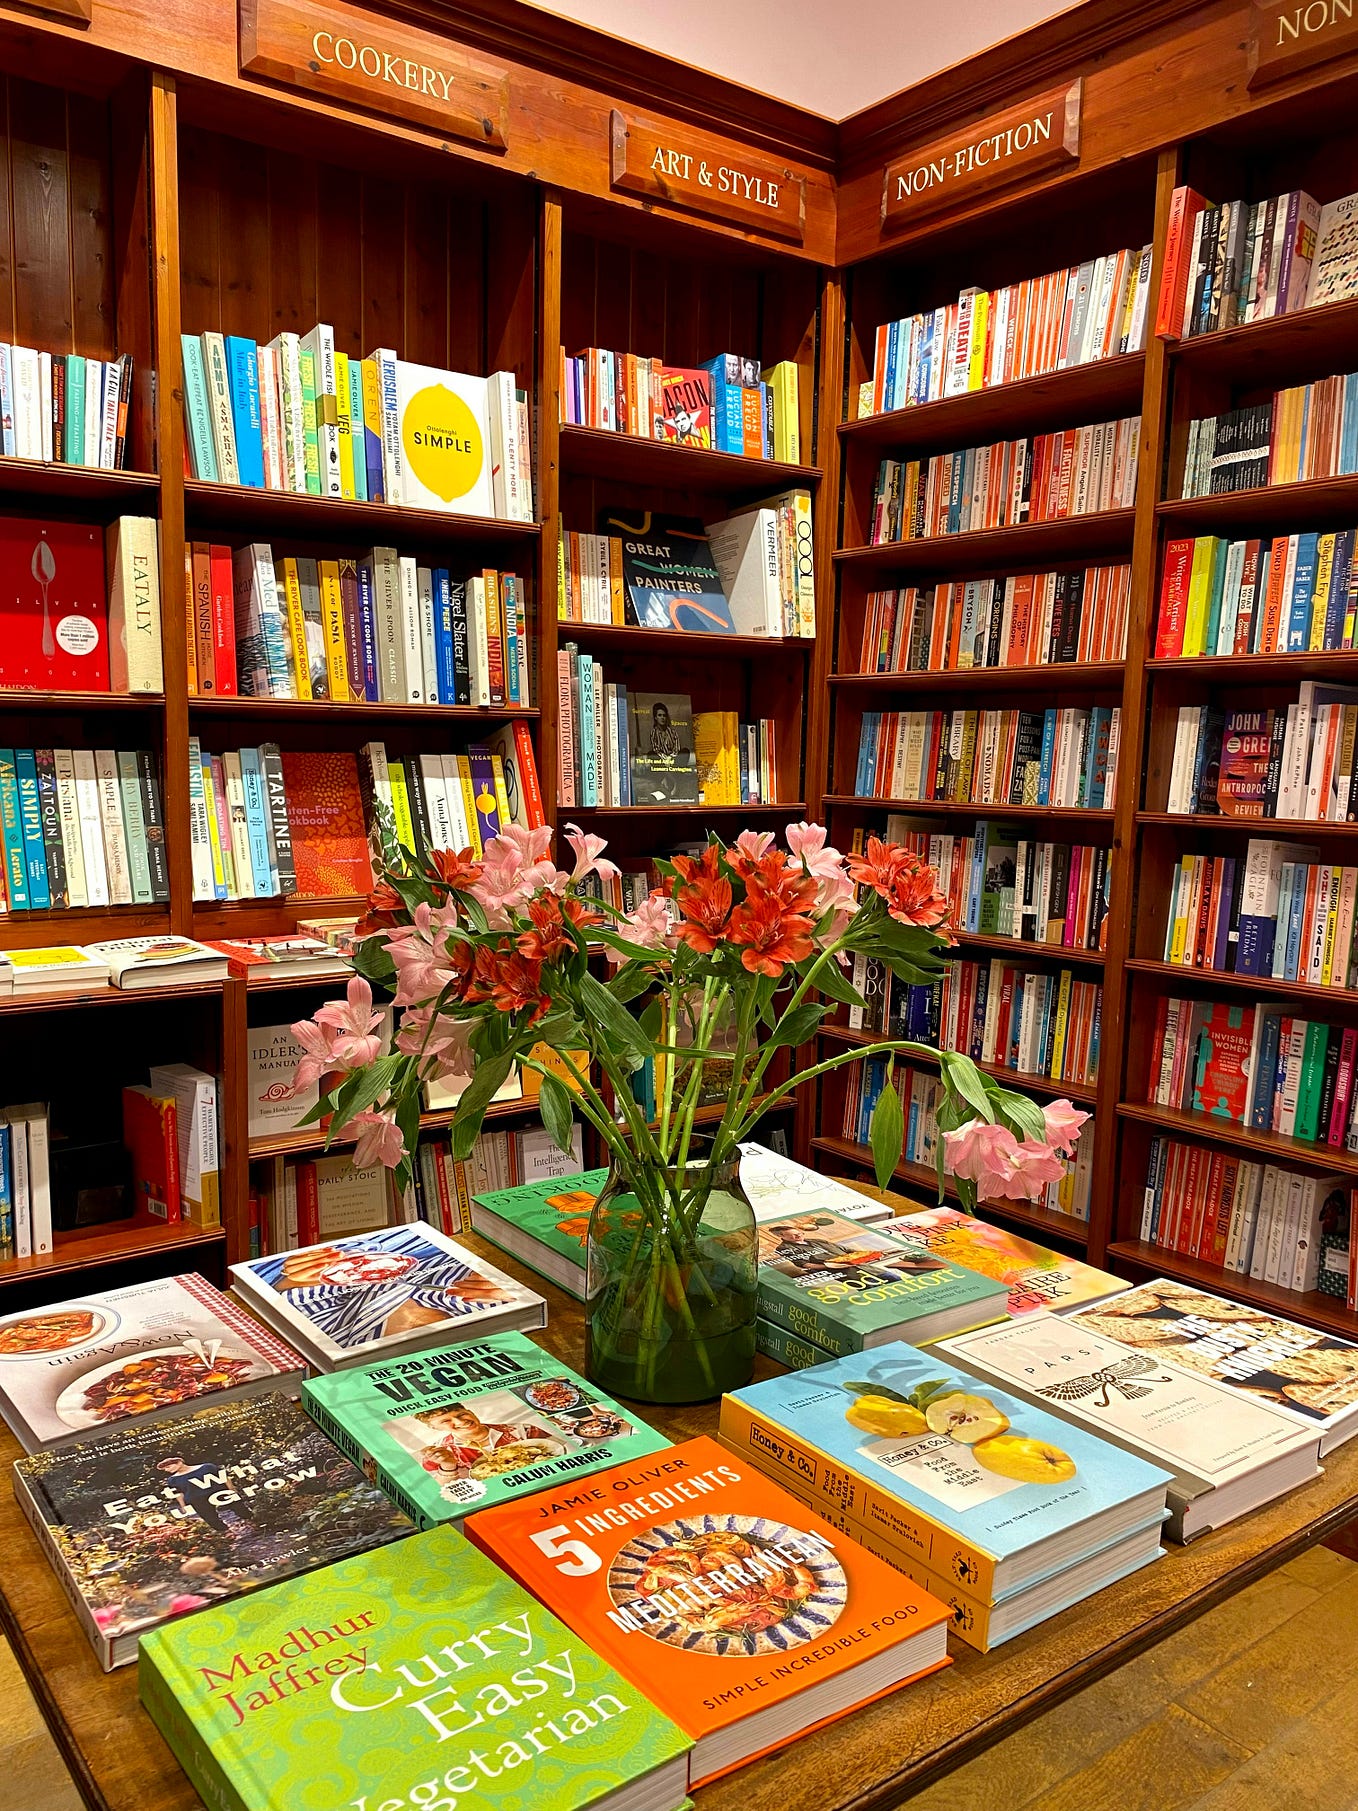 A bookshop’s shelves and table display with flowers in a vase